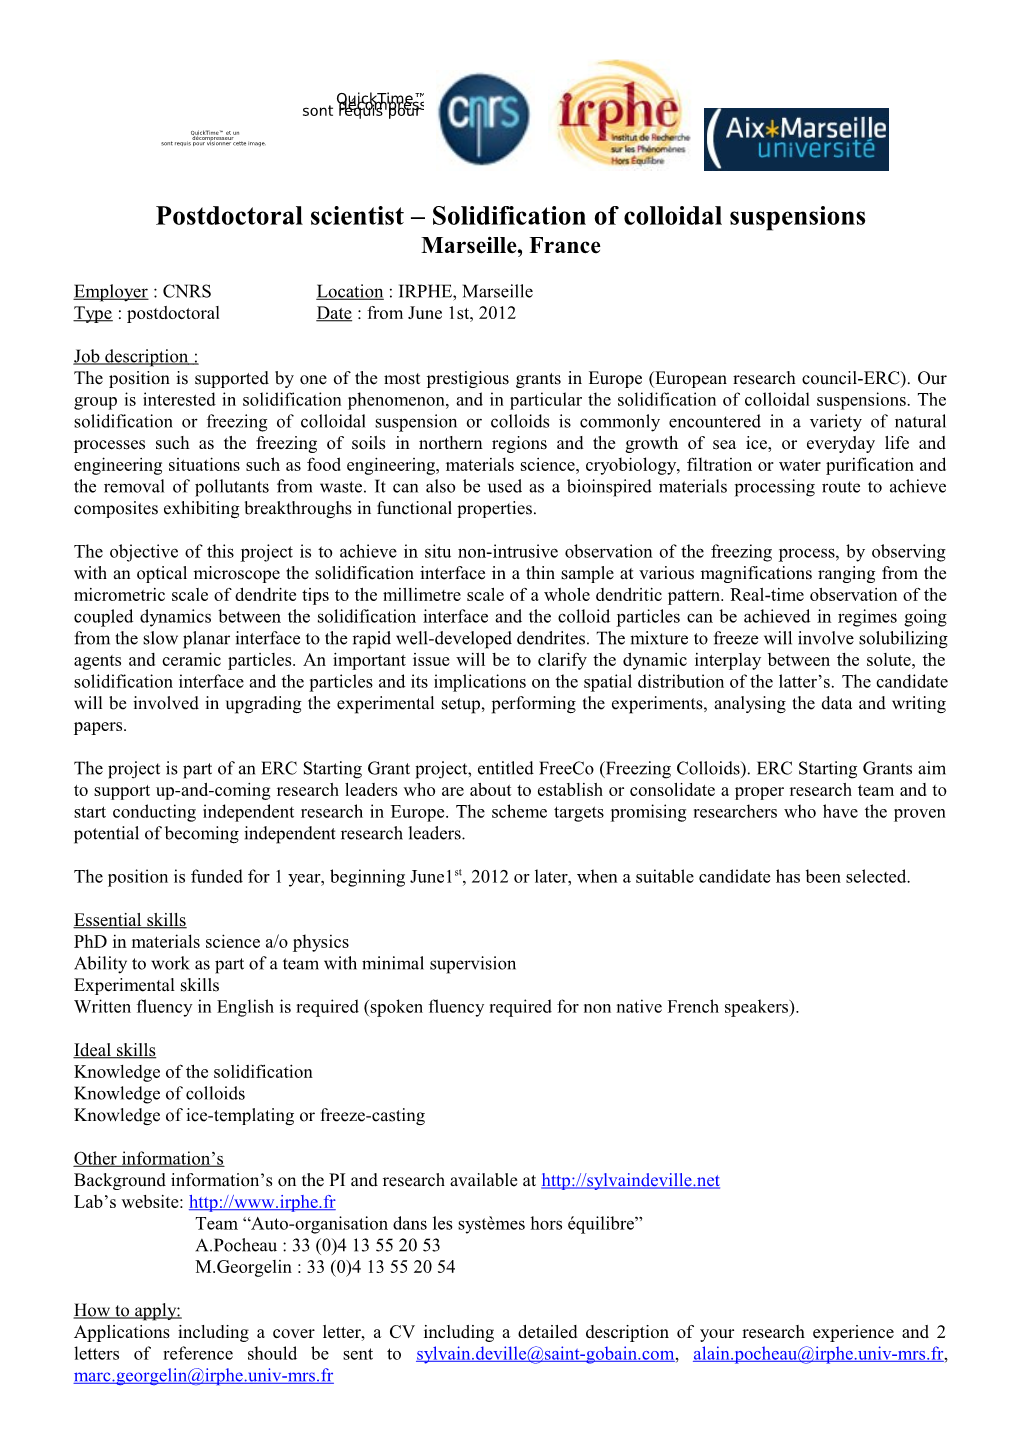 Postdoctoral Scientist Solidification of Colloidal Suspensions, Marseille, France